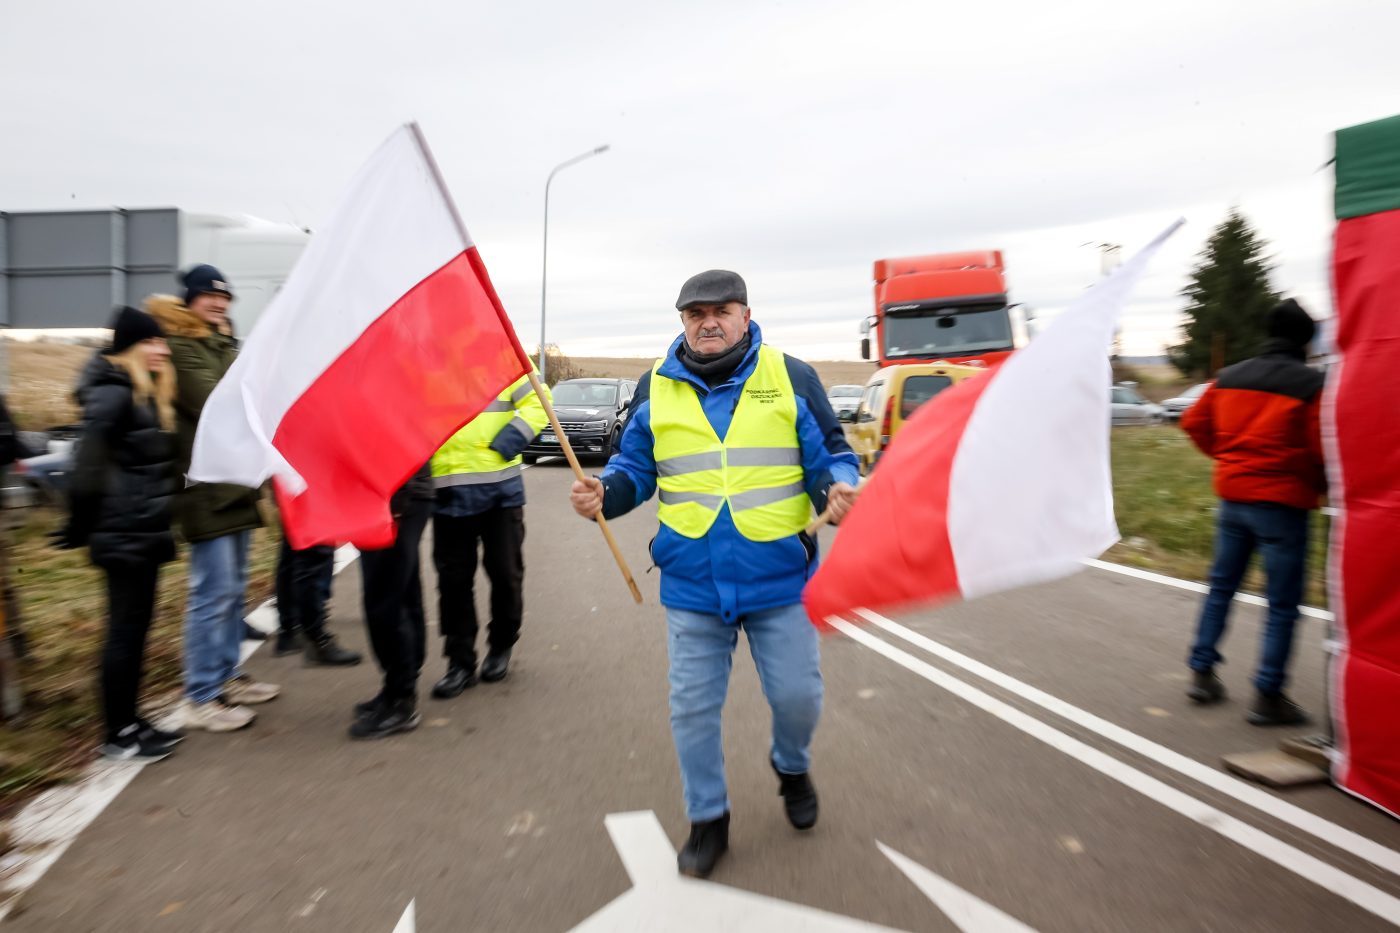 Photo: Polish farmer carries Polish flags on the strike post by the road as the farmers block truck transport in Medyka - another border crossing between Poland and Ukraine, on November 23, 2023. The farmers joined the transport sector in the strike against poor management of agricultural imports of Ukrainian produce as well as demand renegotiation of transport deals between Ukraine and the European Union. Medyka is the fourth strike site. Protesters already blocked 3 other crossings for truck transport, allowing only 4 trucks per an hour excluding humanitarian and military aid and sensitive chemical and food goods. According to the drivers, the queue to the Medyka crossing was nearly 7 days even before the strike started today. Credit: Dominika Zarzycka/NurPhoto.